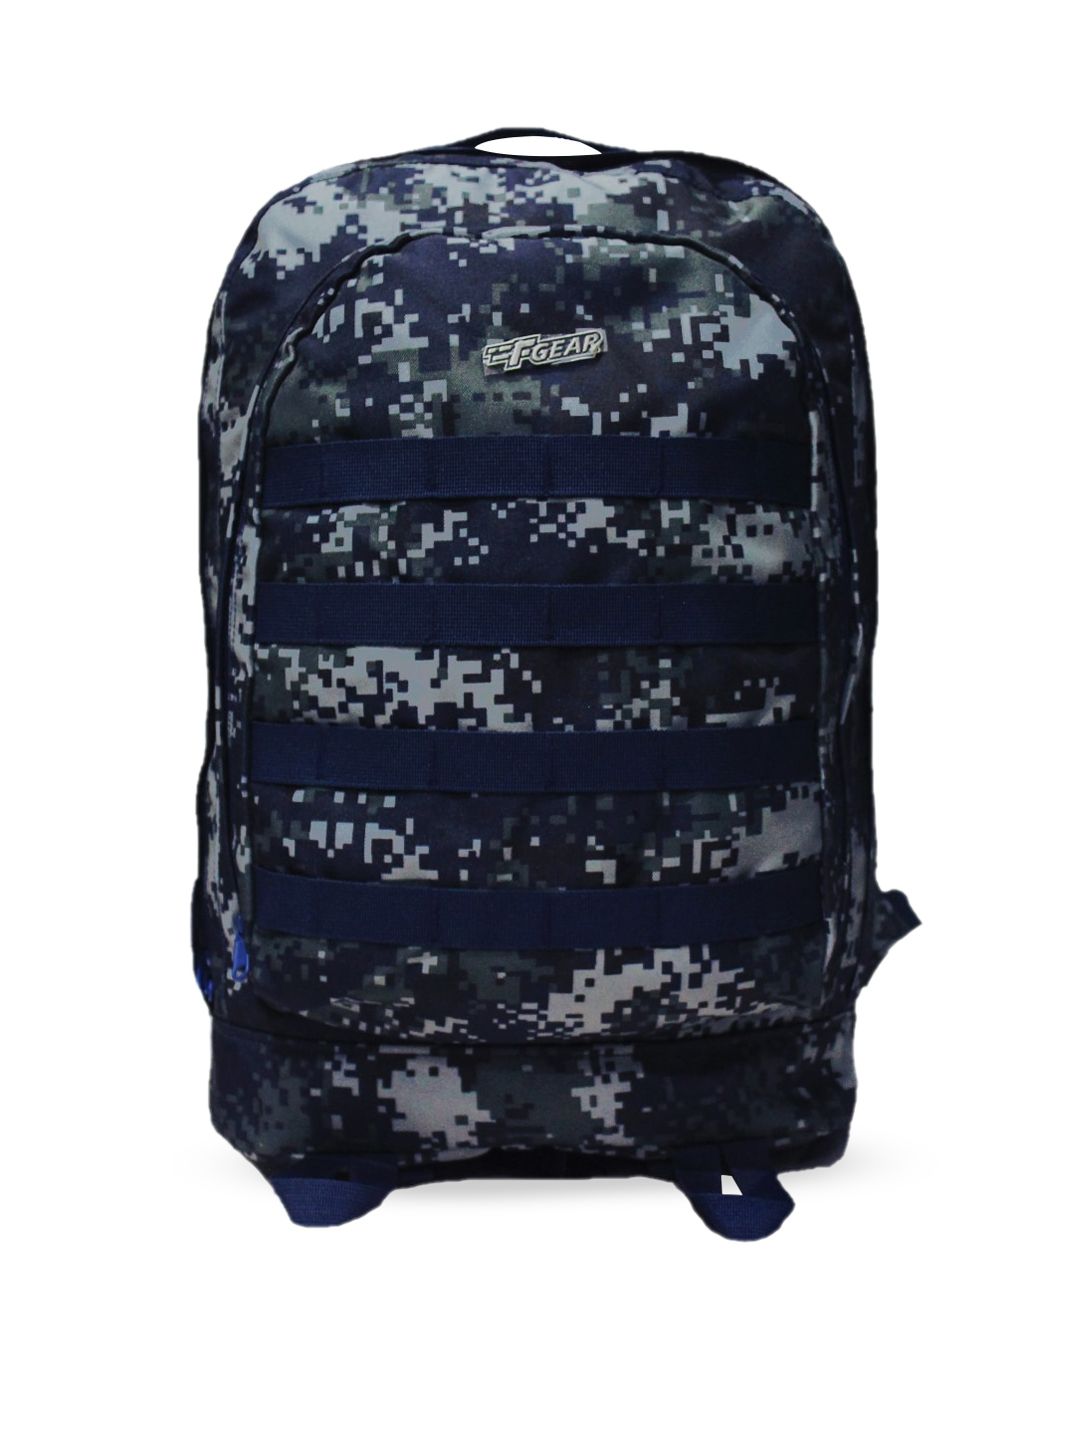 F Gear Unisex Navy Blue Camouflage Backpack Price in India